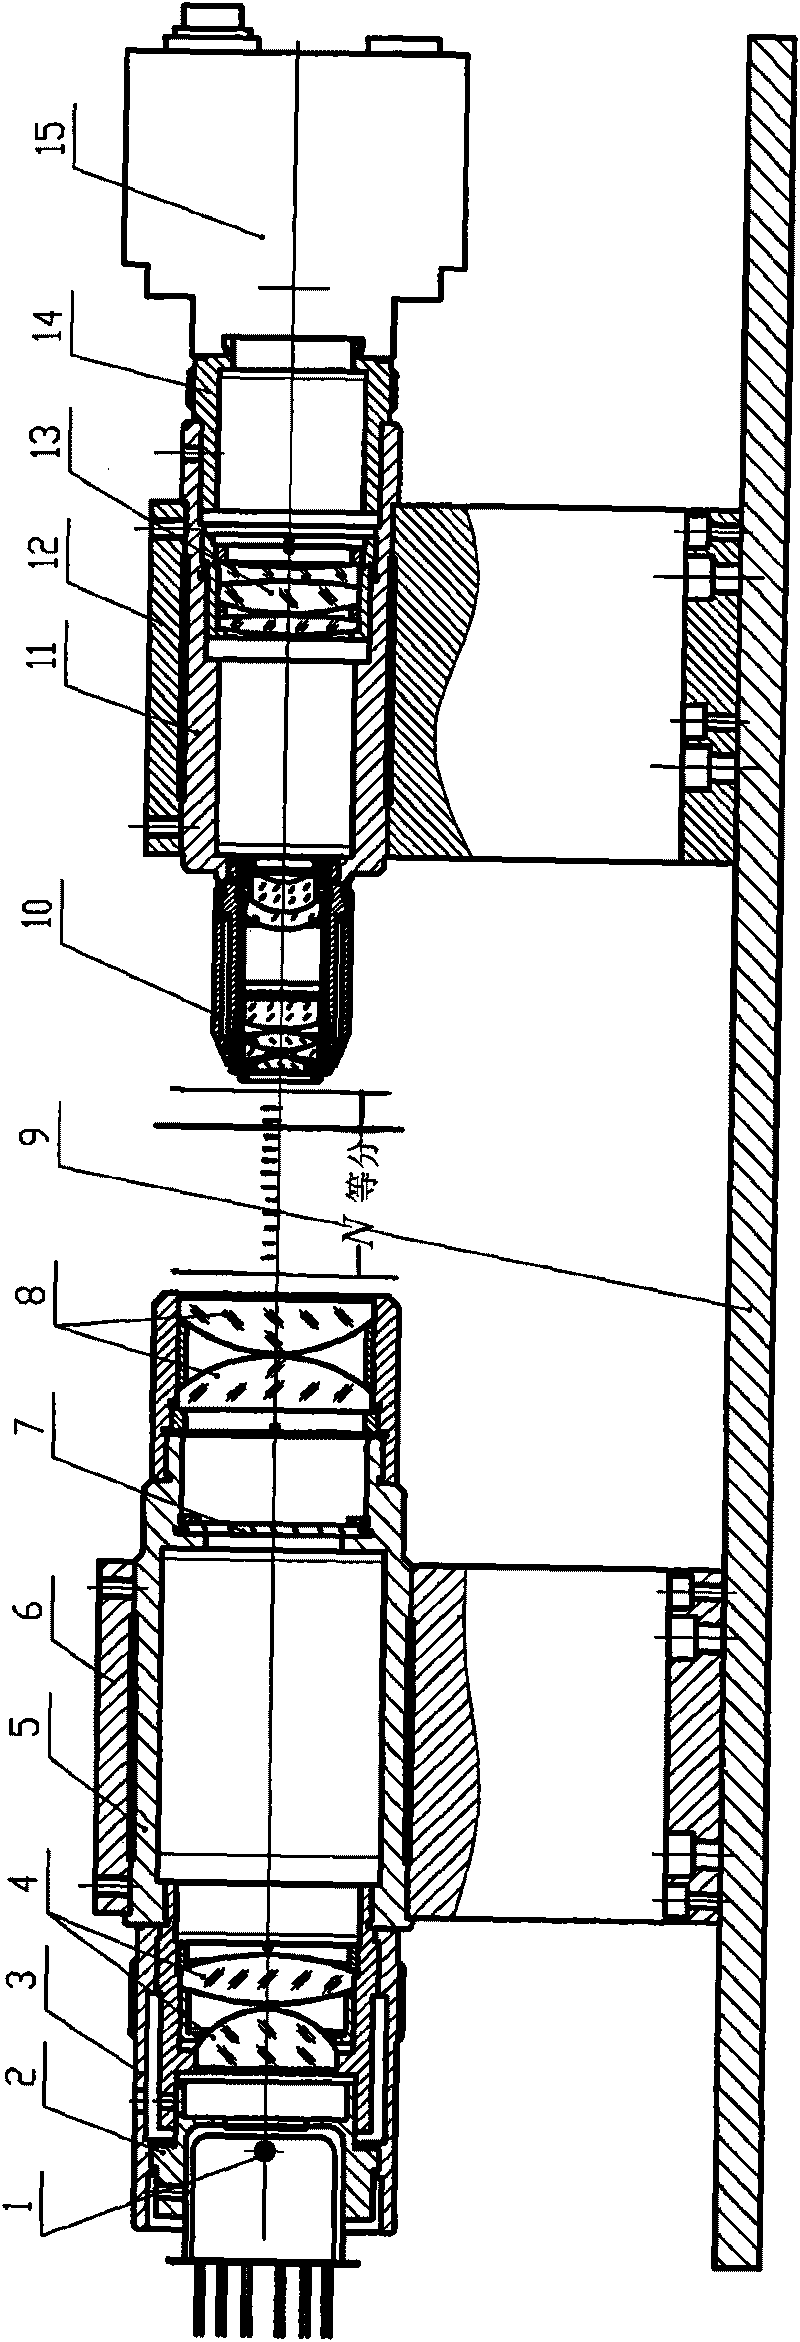 Method for automatically focusing microscope system in urinary sediment examination equipment